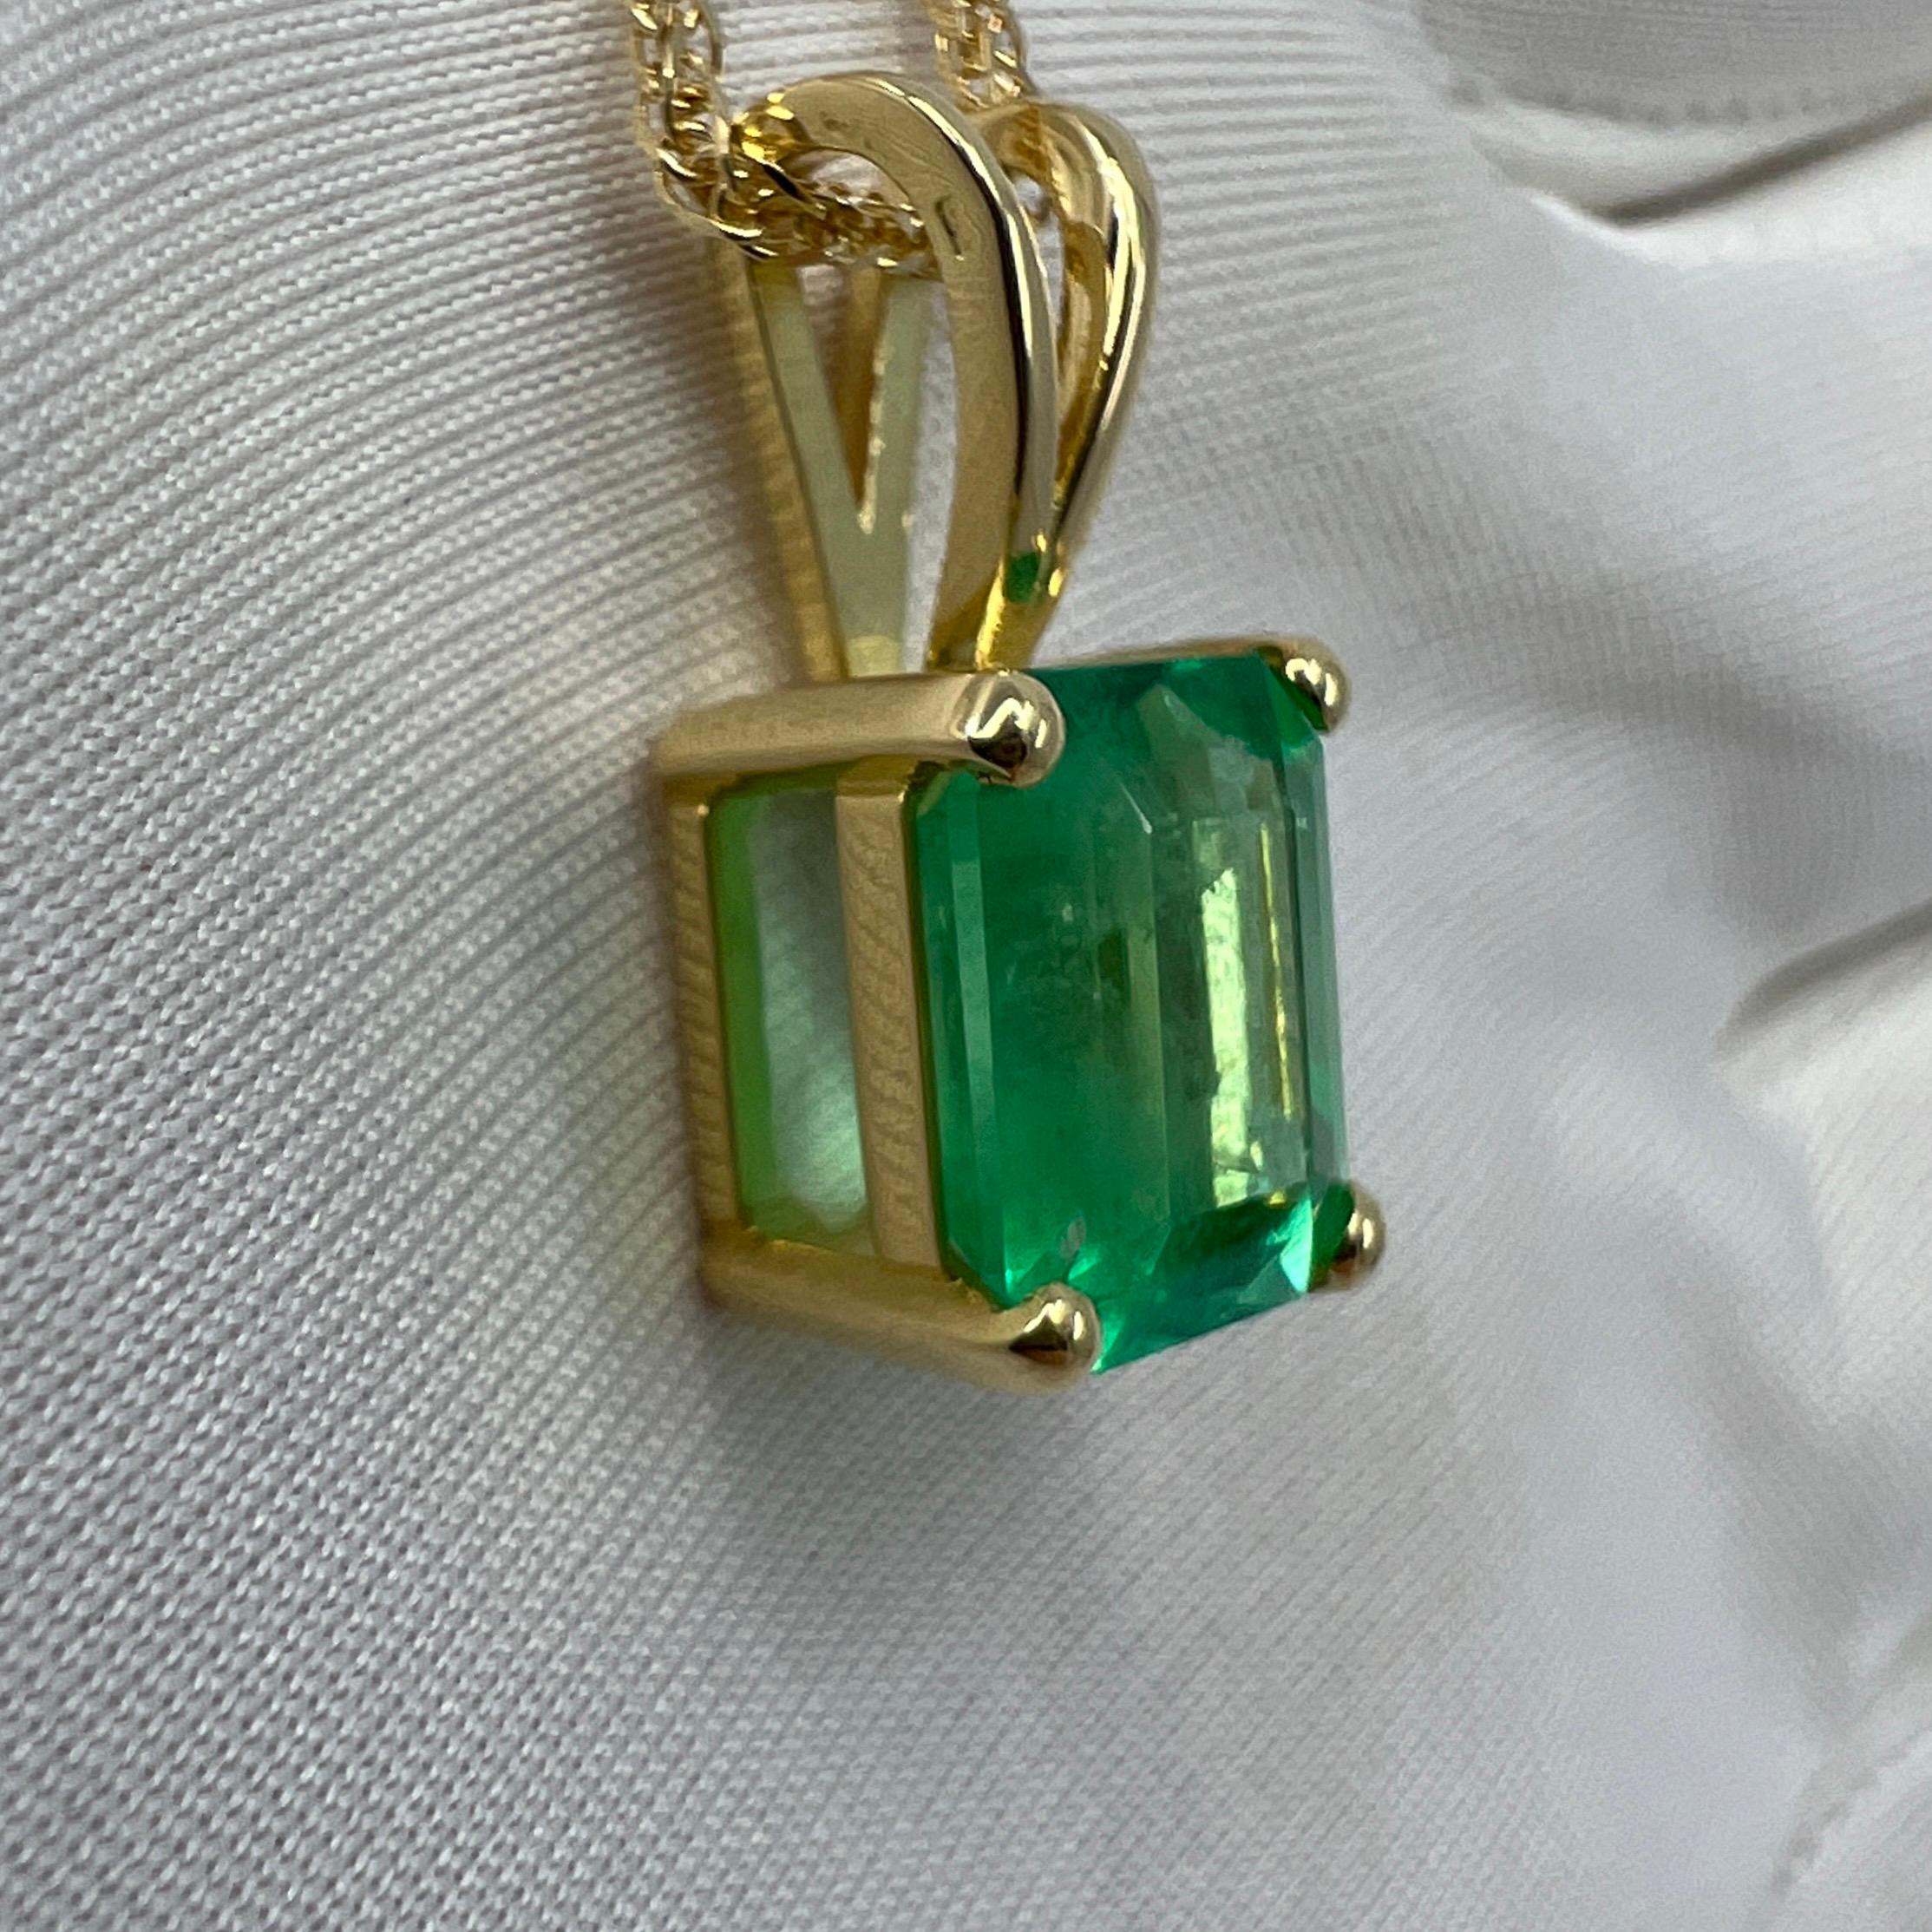 GIA Certified 3.32ct Vivid Green Colombian Emerald 18k Gold Pendant Necklace 1